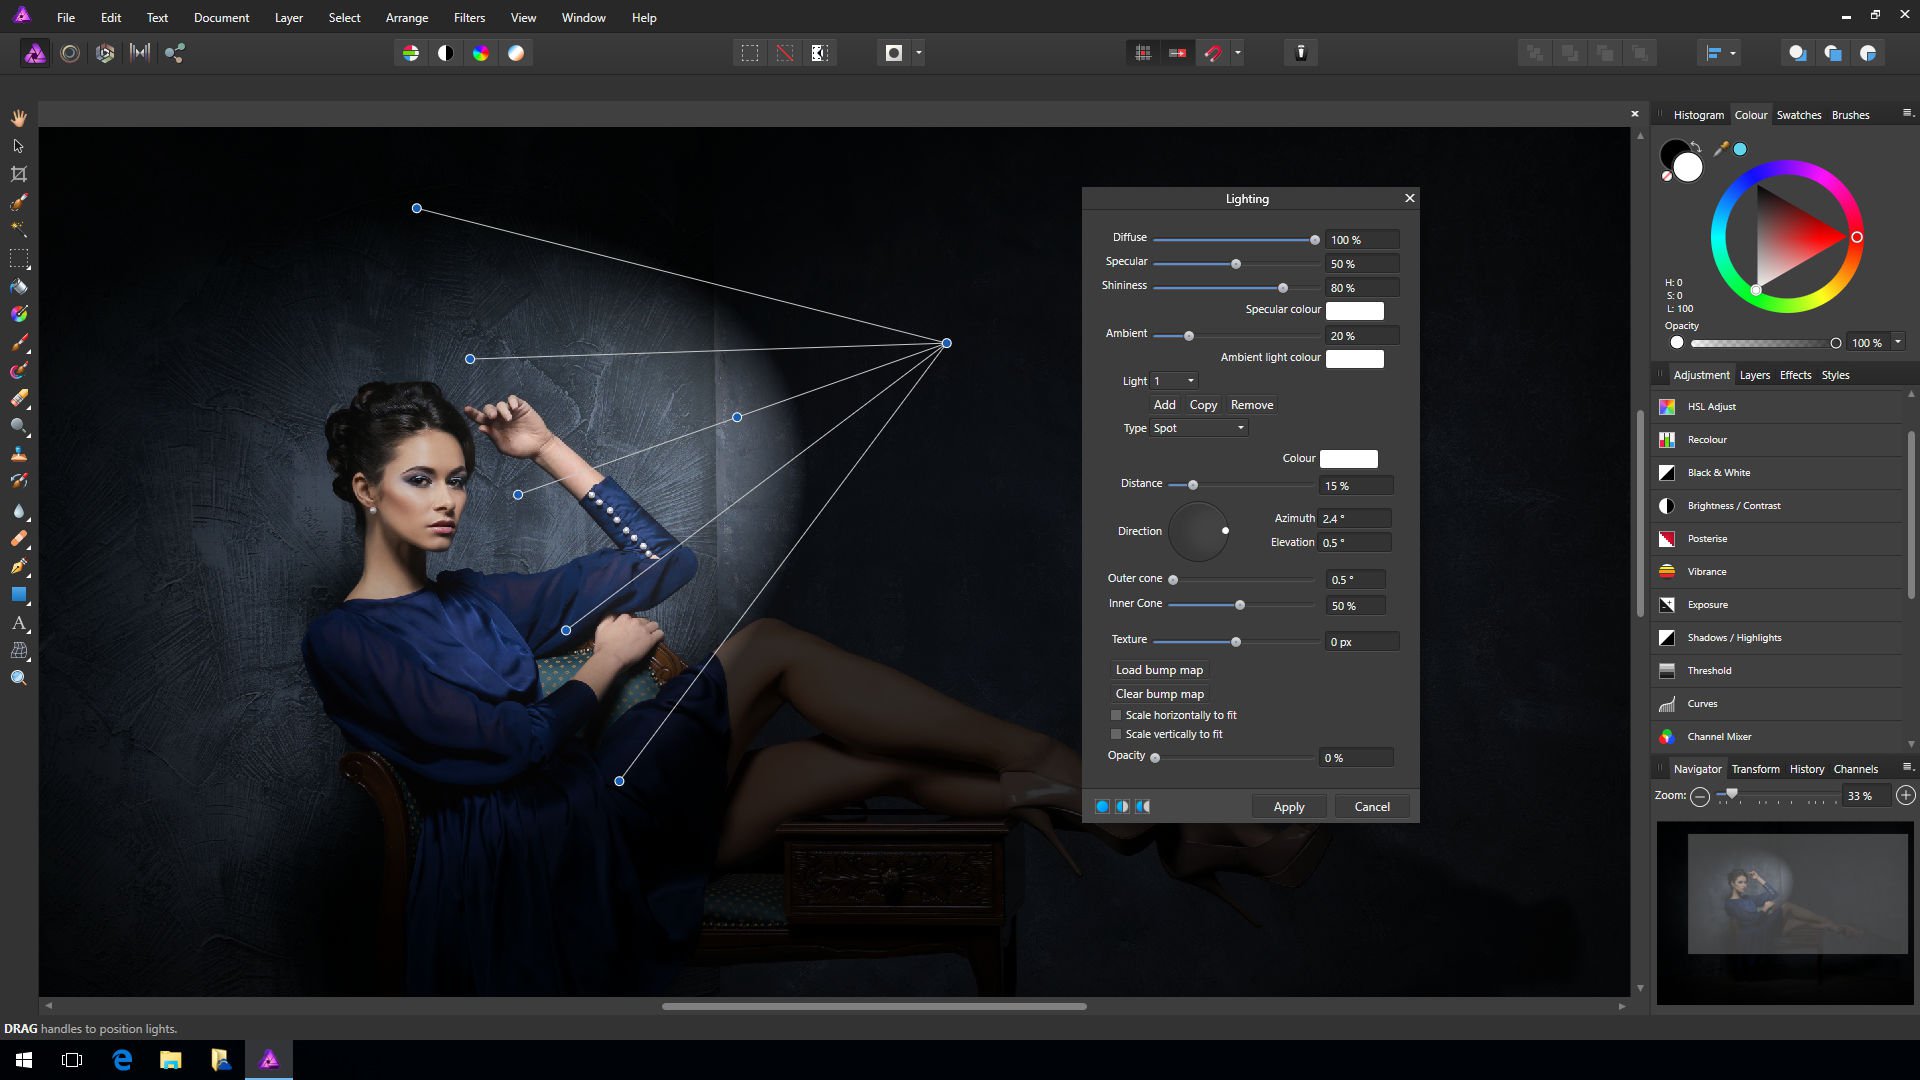 Affinity photo free trial